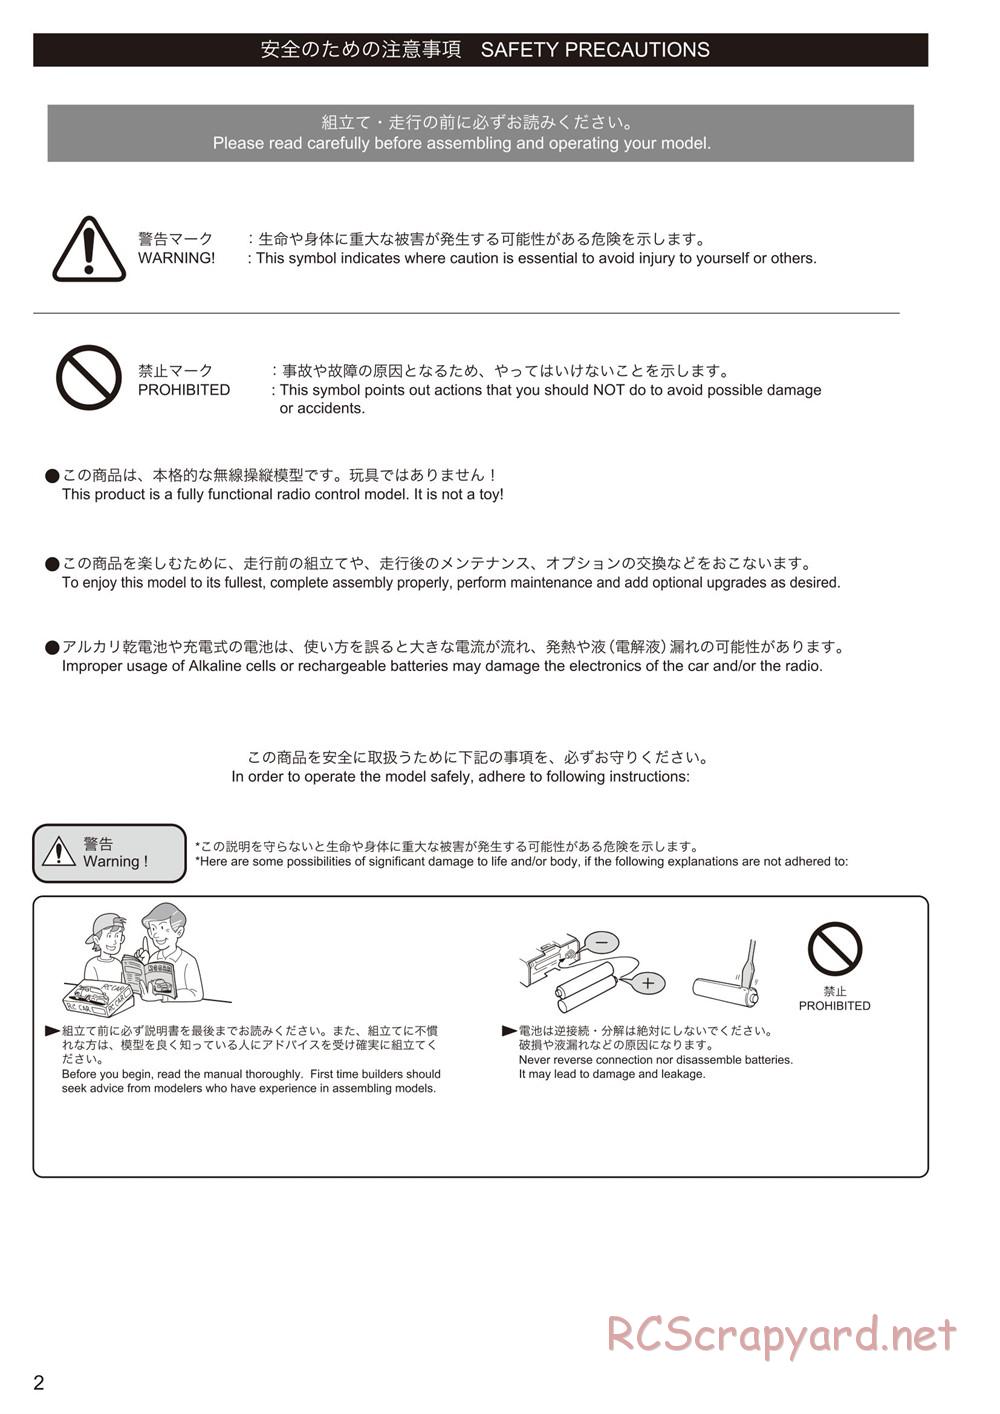 Kyosho - Ultima RB6 (2015) - Manual - Page 2